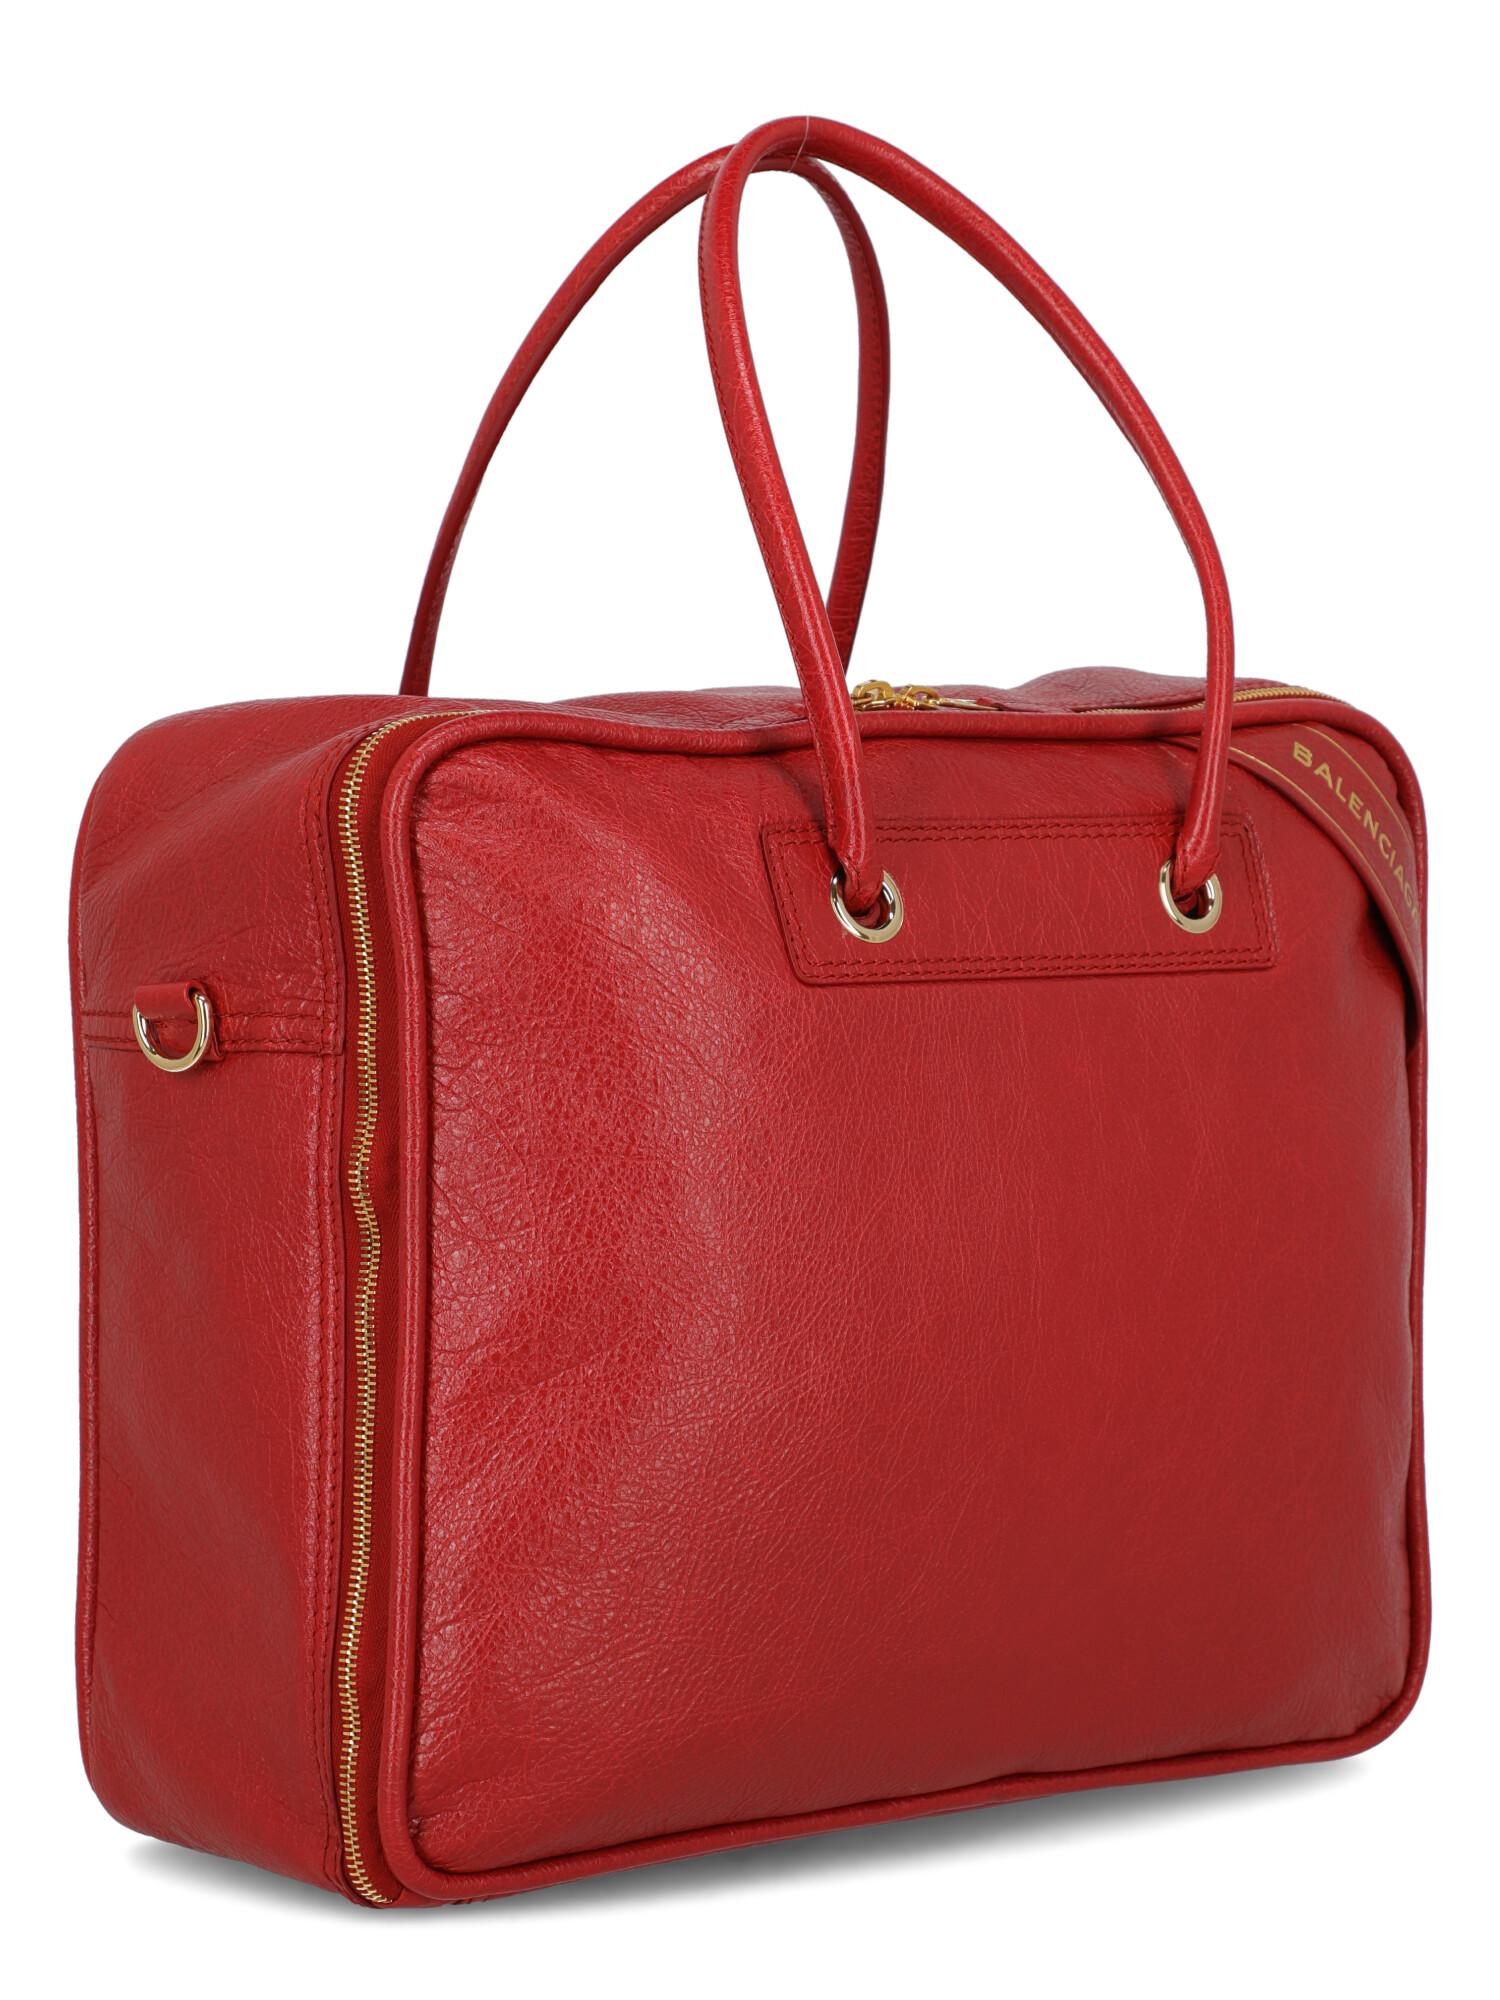 Balenciaga Woman Shoulder bag Red Leather In Excellent Condition For Sale In Milan, IT